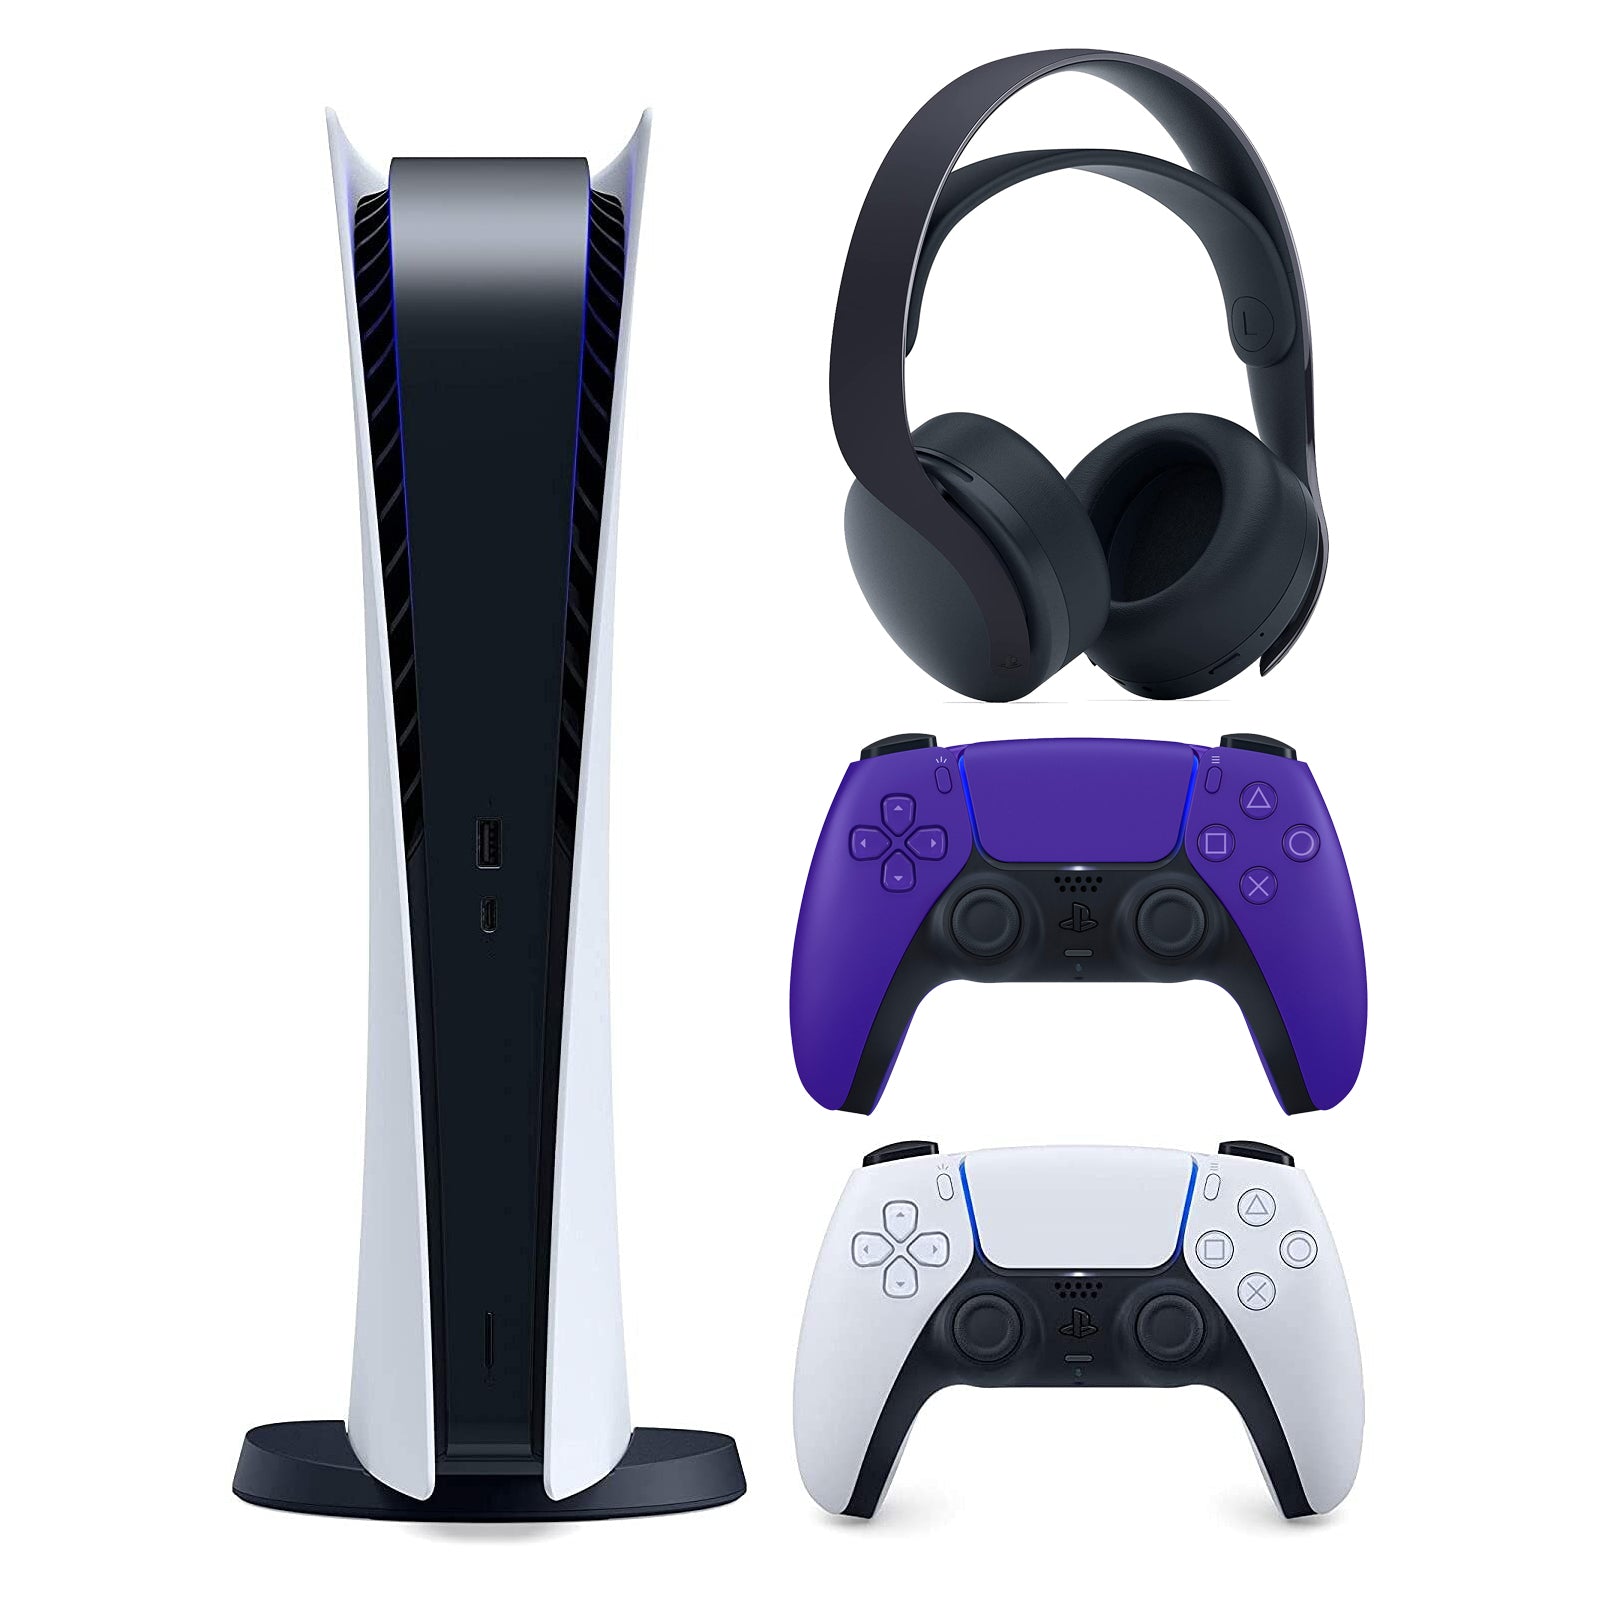 Sony Playstation 5 Digital Version (Sony PS5 Digital) with Extra Galactic Purple Controller and Black PULSE 3D Headset Bundle - Pro-Distributing